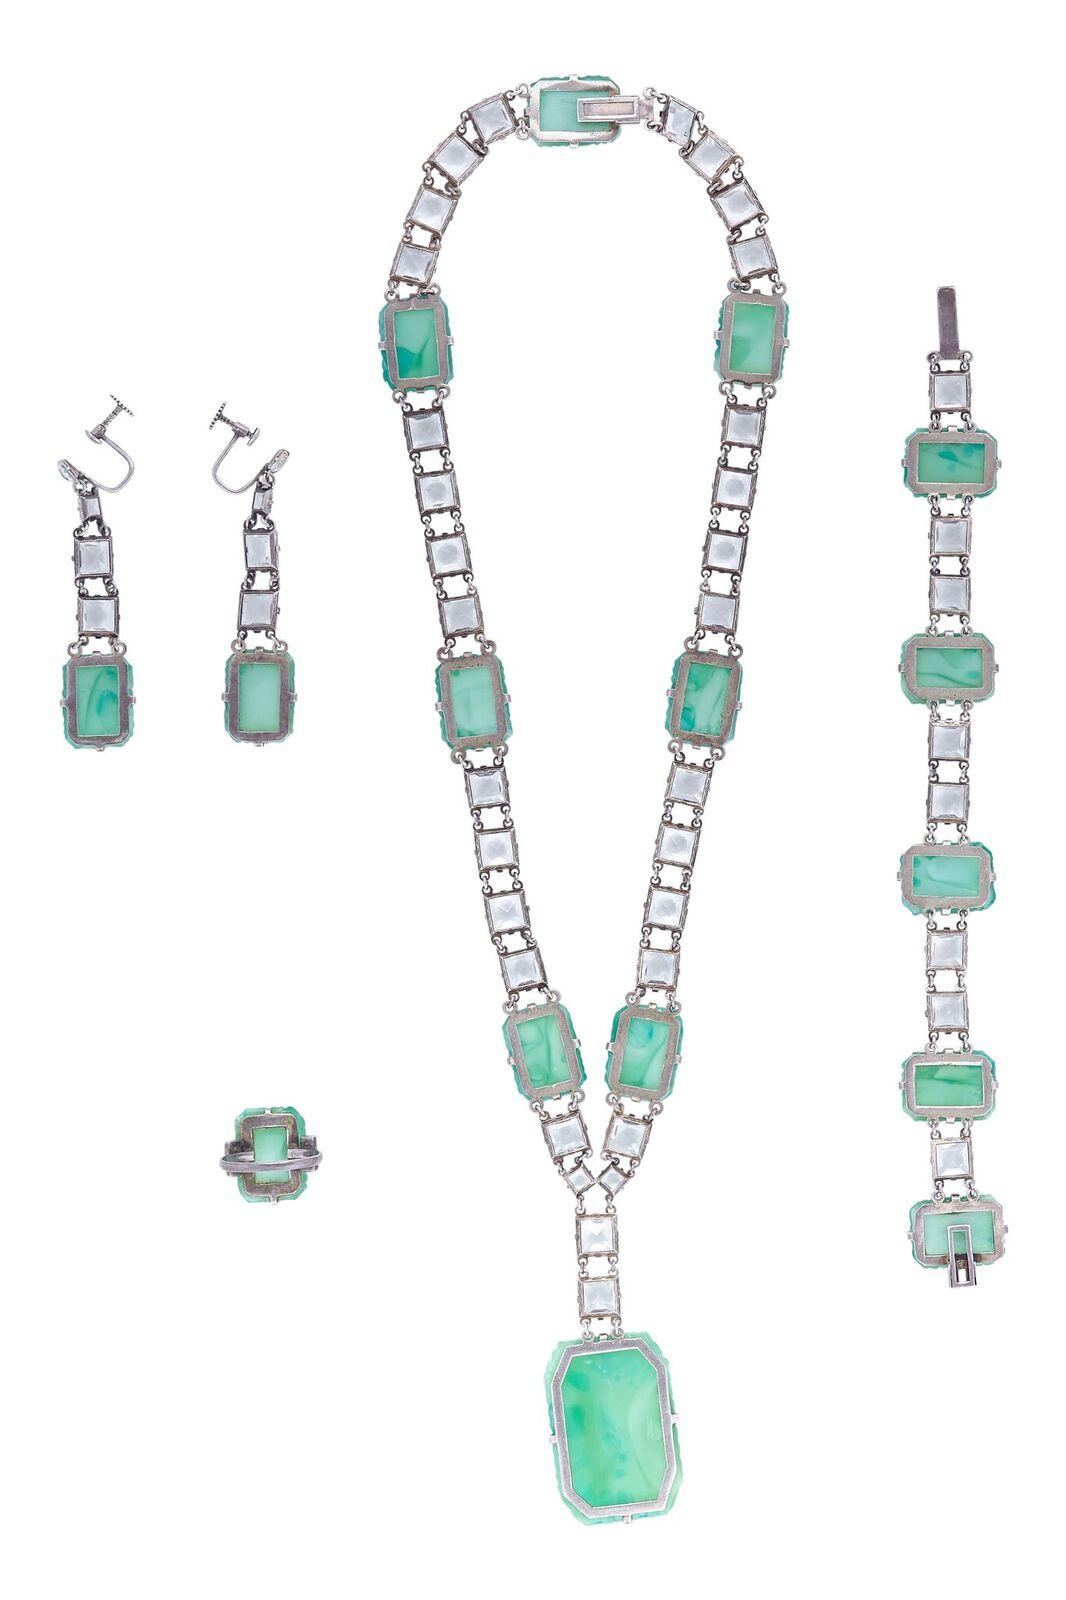 This exquisite 1930s Art Deco Peking Glass 4 piece set with prong set rock crystals is comprised of a ring, earrings, matching bracelet and necklace with a large drop pendant, and is in absolutely beautiful condition. Peking Glass is very